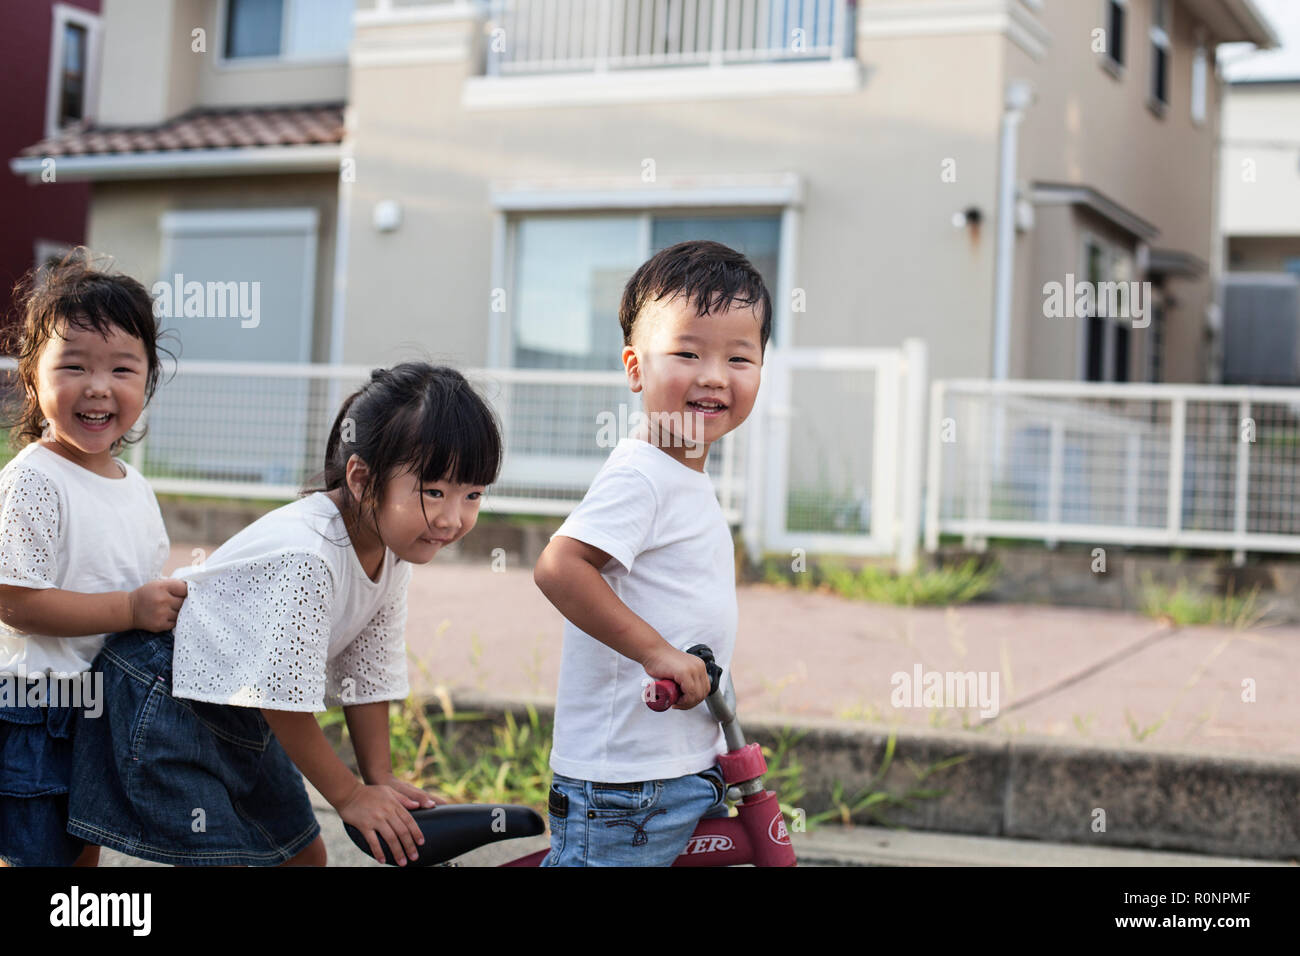 Portrait of two Japanese girls and boy playing on street with a bicycle, smiling at camera. Stock Photo